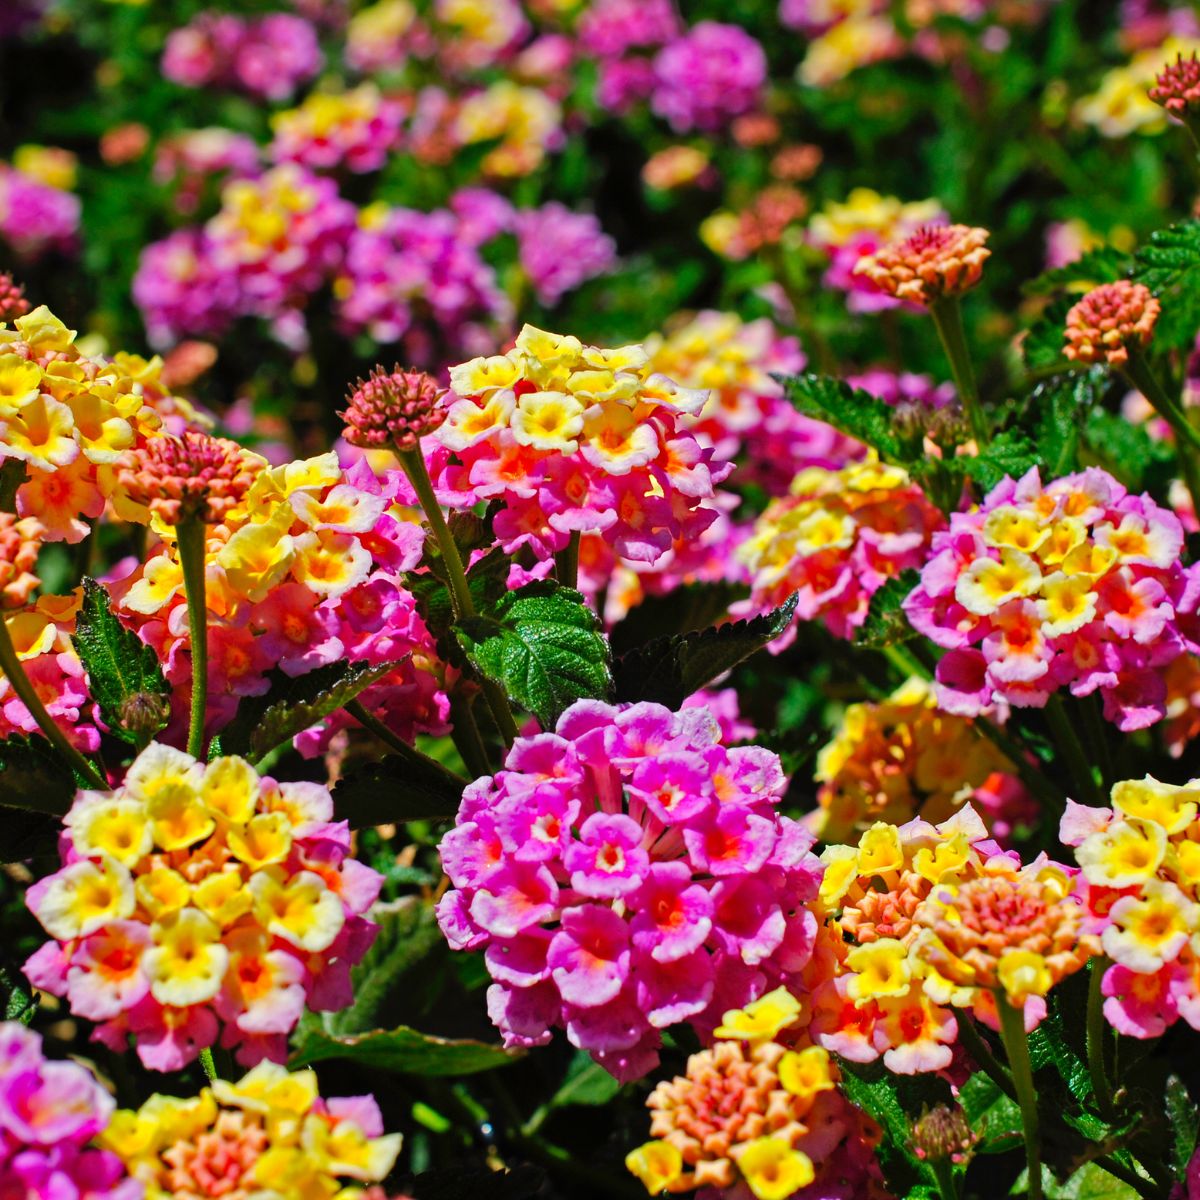 lantana flowers in shades of pink and yellow